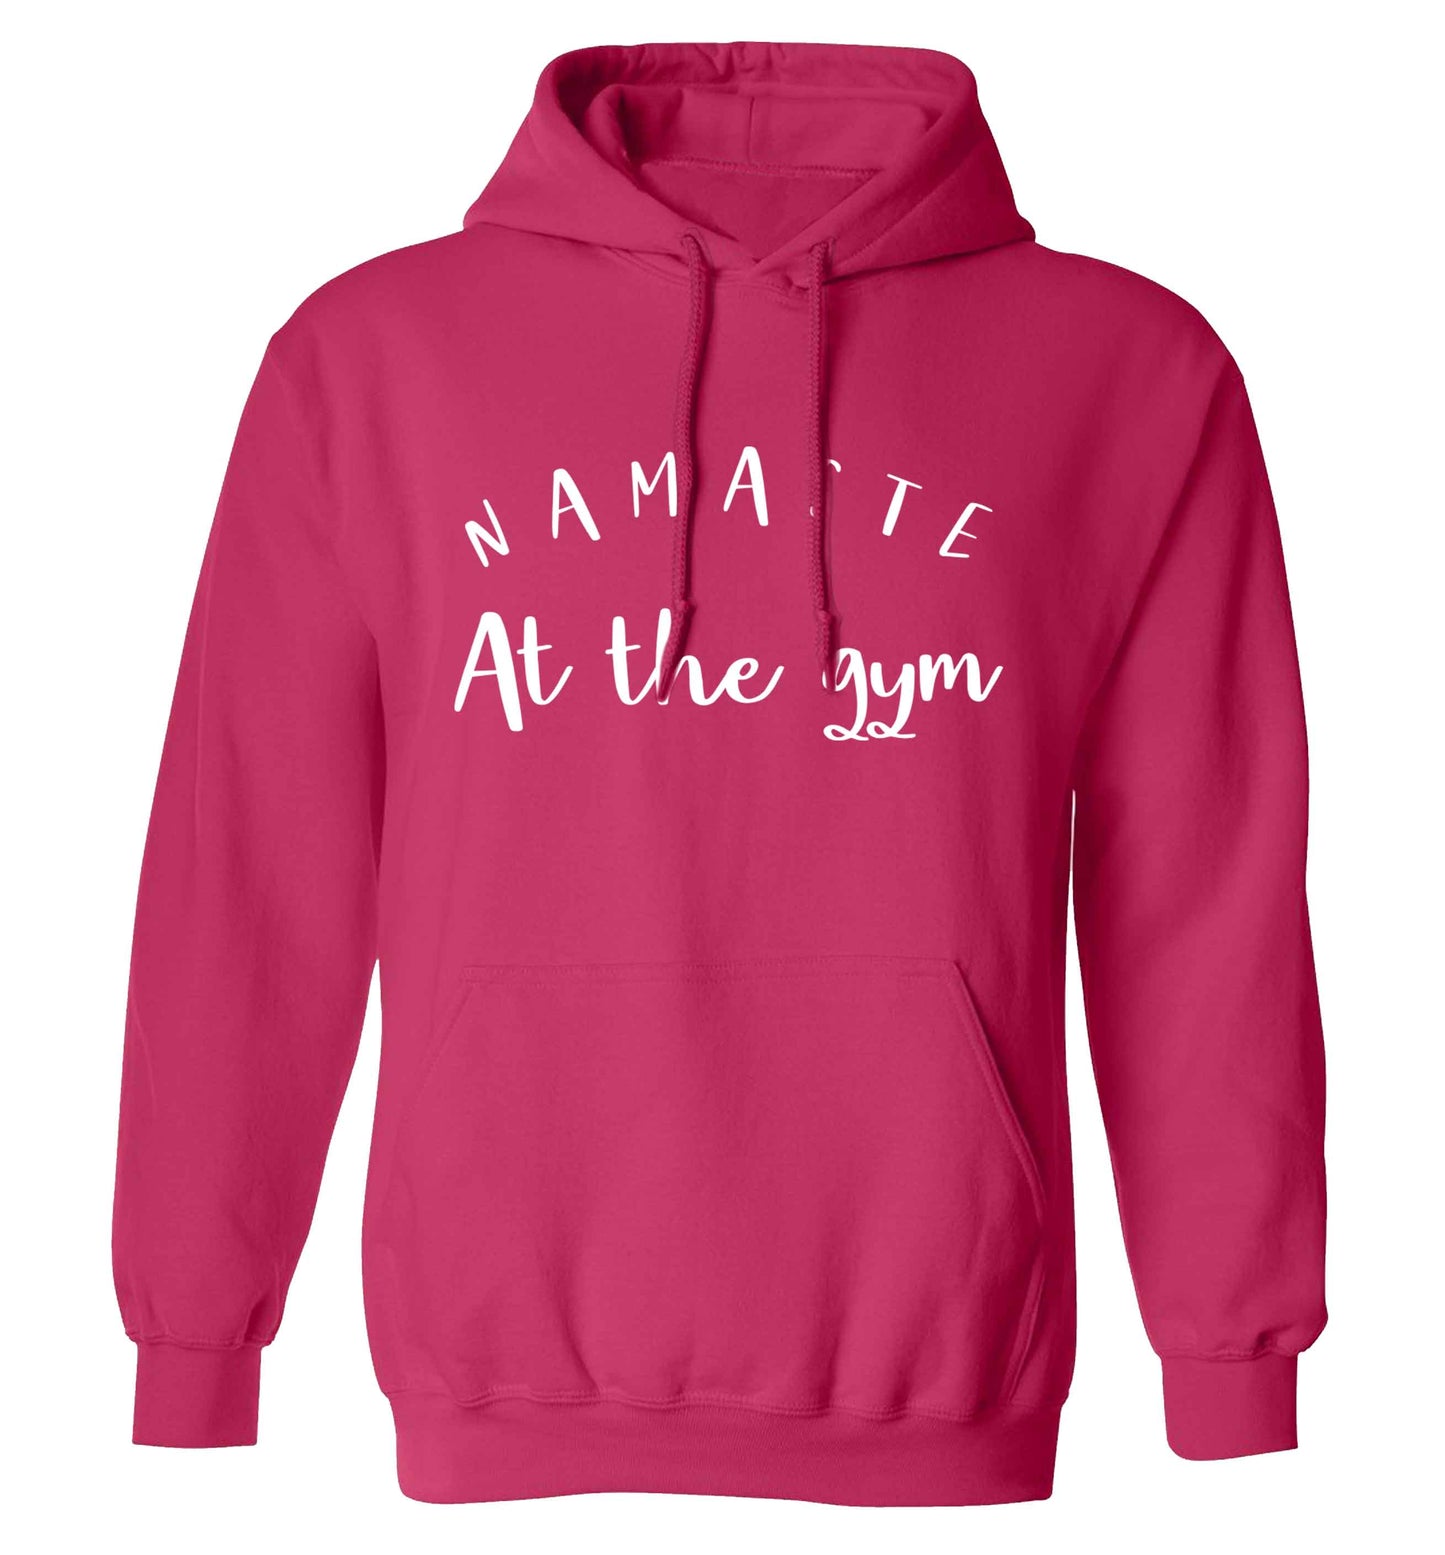 Namaste at the gym adults unisex pink hoodie 2XL